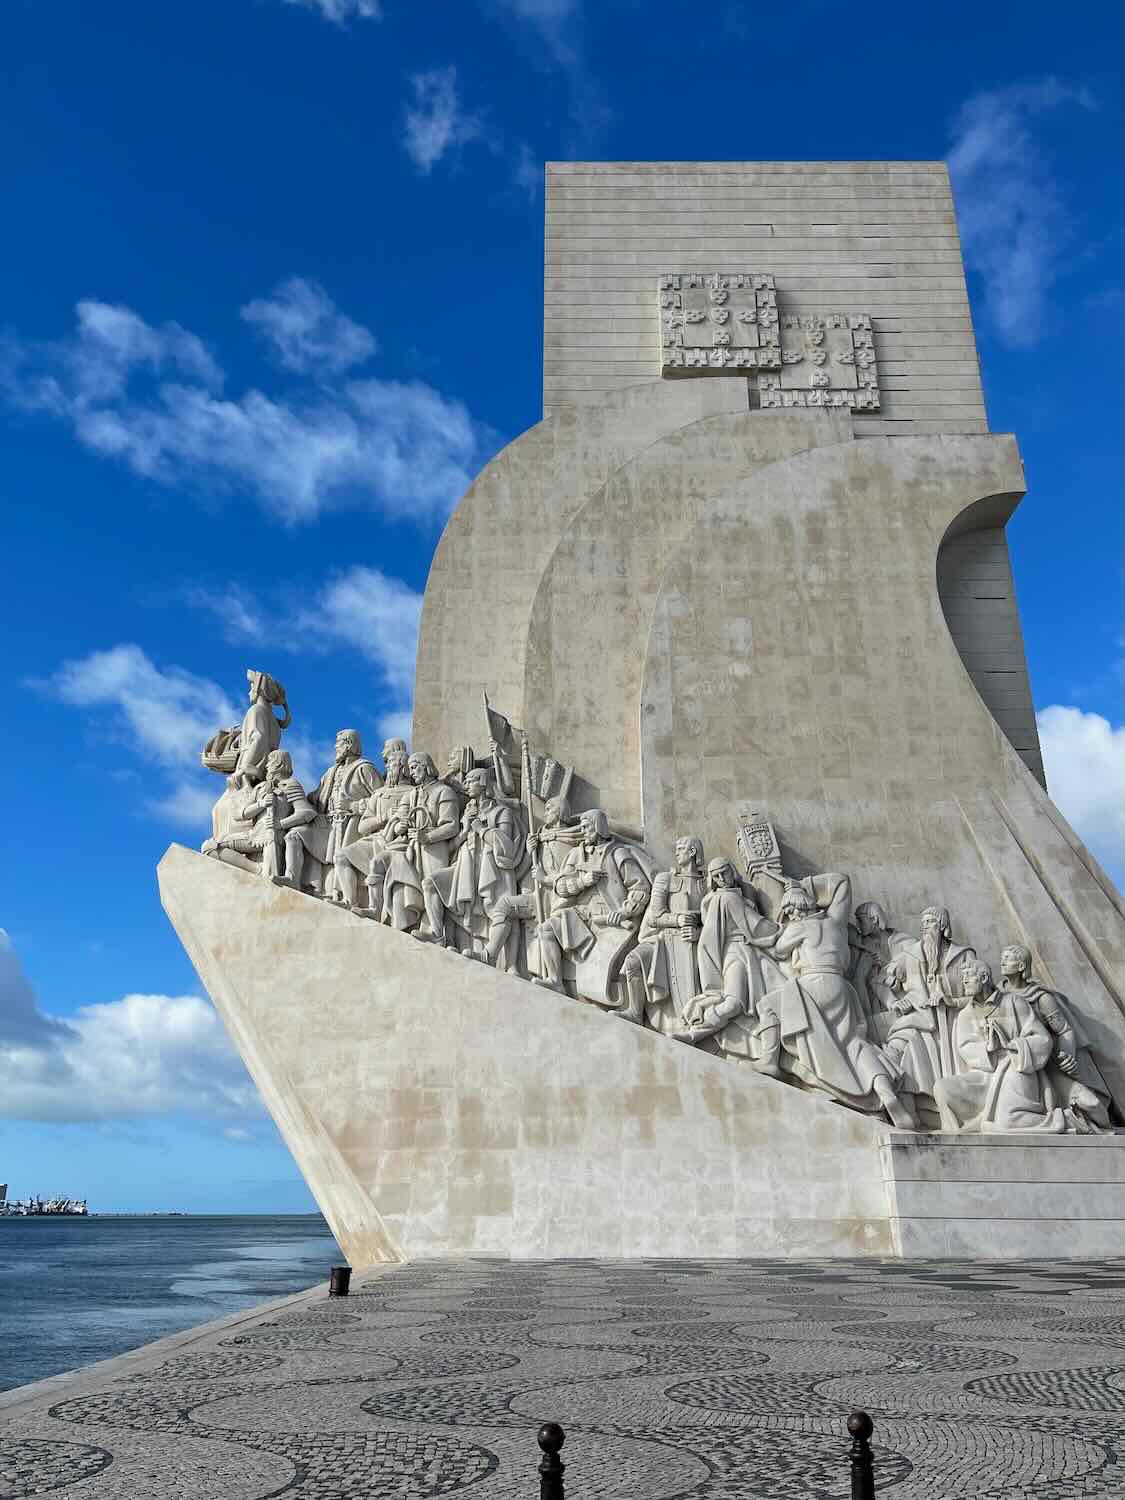 The iconic Padrão dos Descobrimentos monument in Lisbon, celebrating the Portuguese Age of Discovery, against a bright blue sky with sculpted figures of explorers.